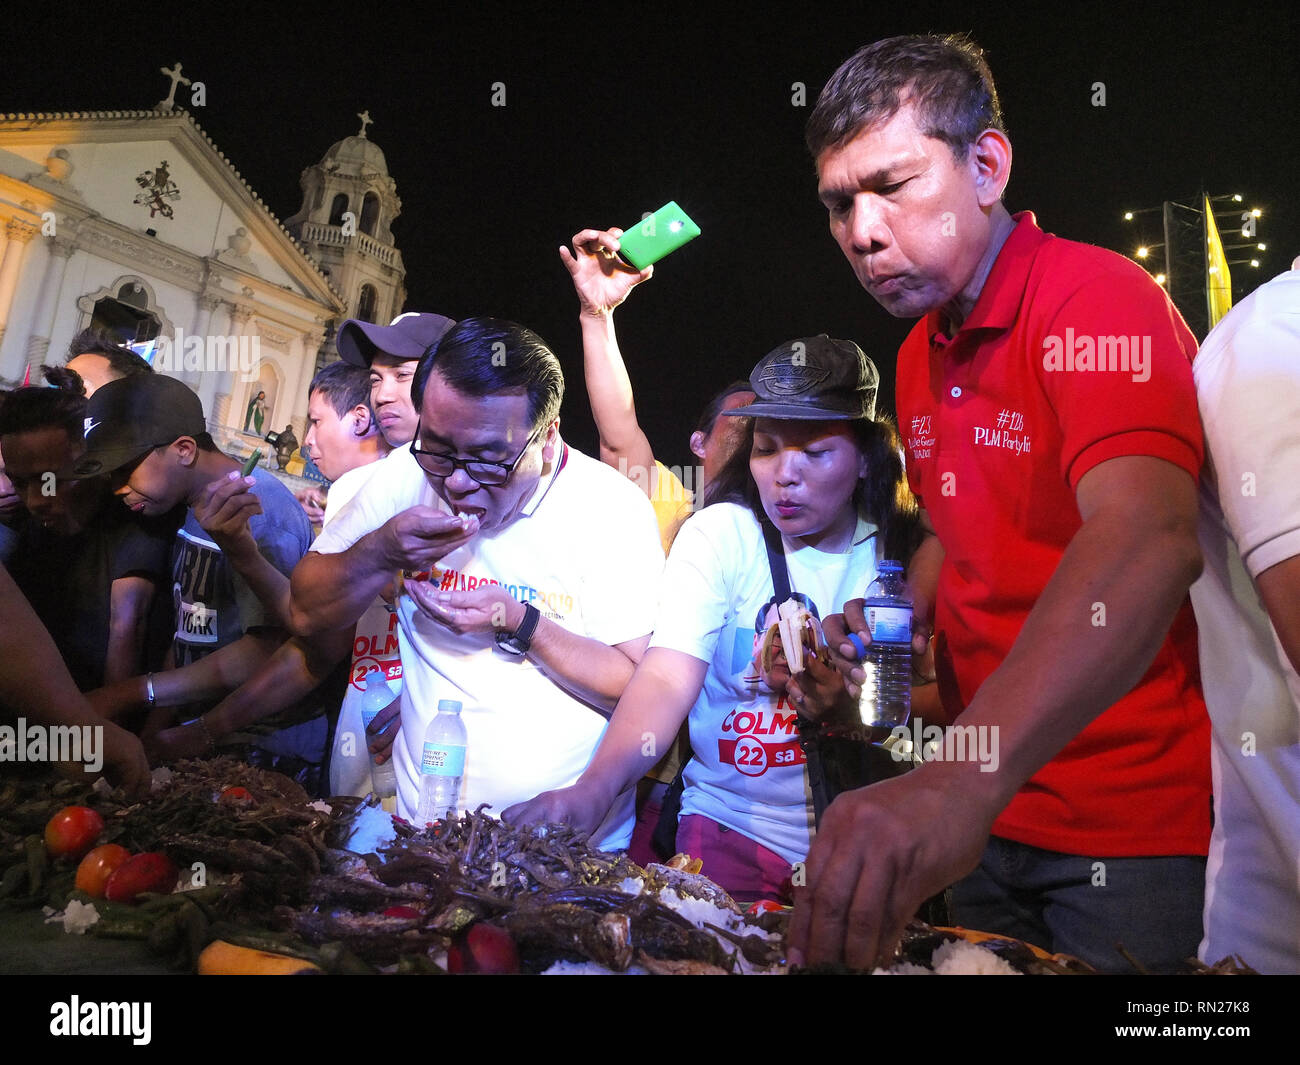 Manila, Philippines. 6th May, 2012. Former representative Neri Colmenares (L) and labor leader Leody de Guzman (R) seen participating in the boodle fight during the rally.''Labor Win'' a coalition of labor leaders running for Senate, said they are the only ones who have the ''real'' credentials to push for pro-poor policies unlike other candidates for this year elections.the policial party ''Partido ng Lakas ng Masa'' offers themselves as alternatives in this year's elections. They say they don't belong to either the administration or opposition (Credit Image: © Josefiel Rivera/SOPA Images v Stock Photo